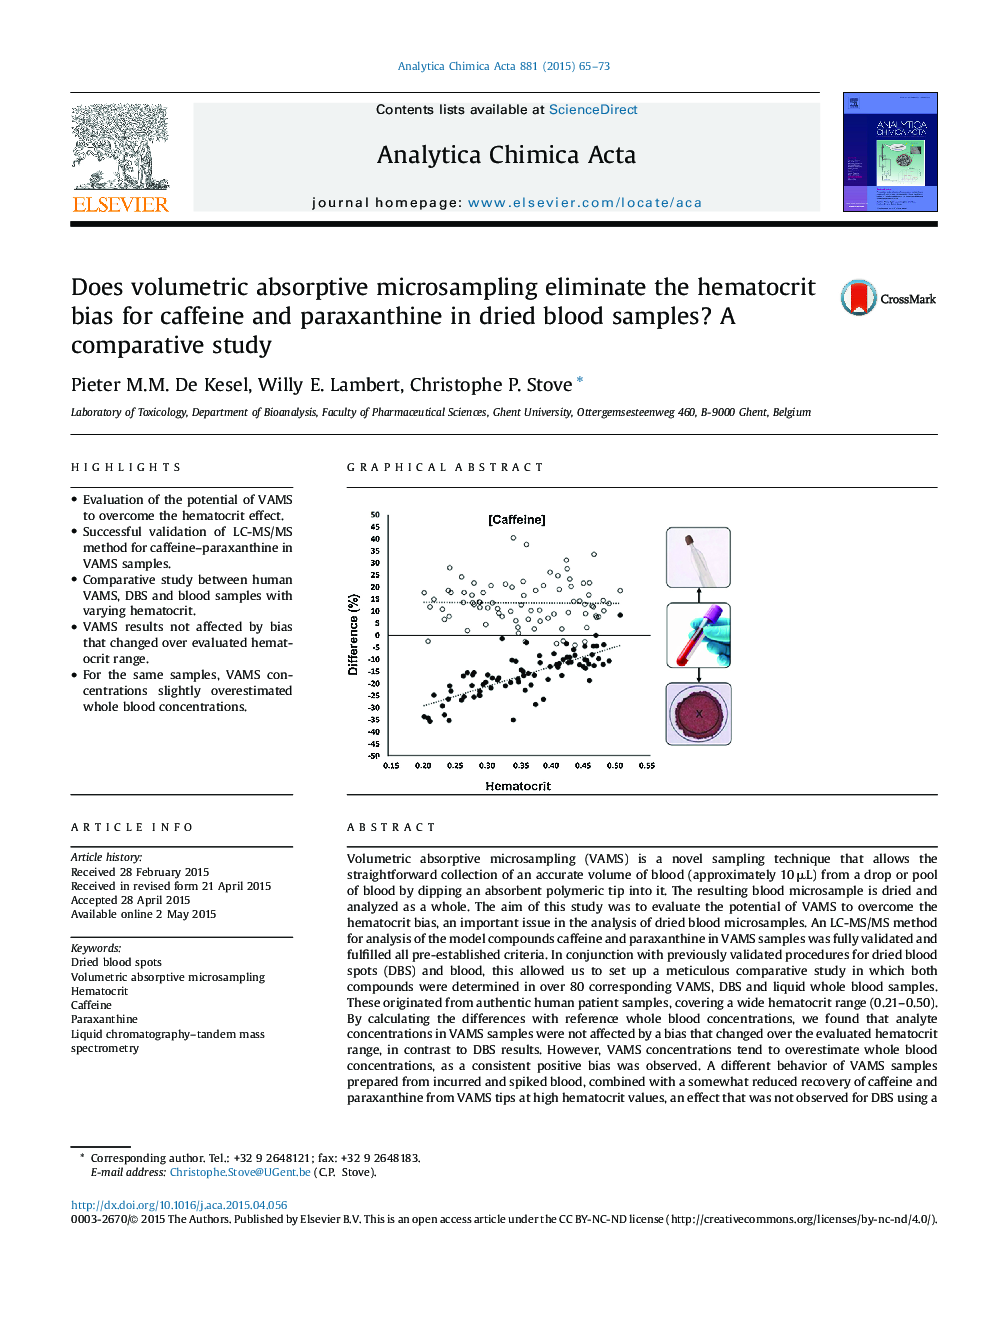 Does volumetric absorptive microsampling eliminate the hematocrit bias for caffeine and paraxanthine in dried blood samples? A comparative study